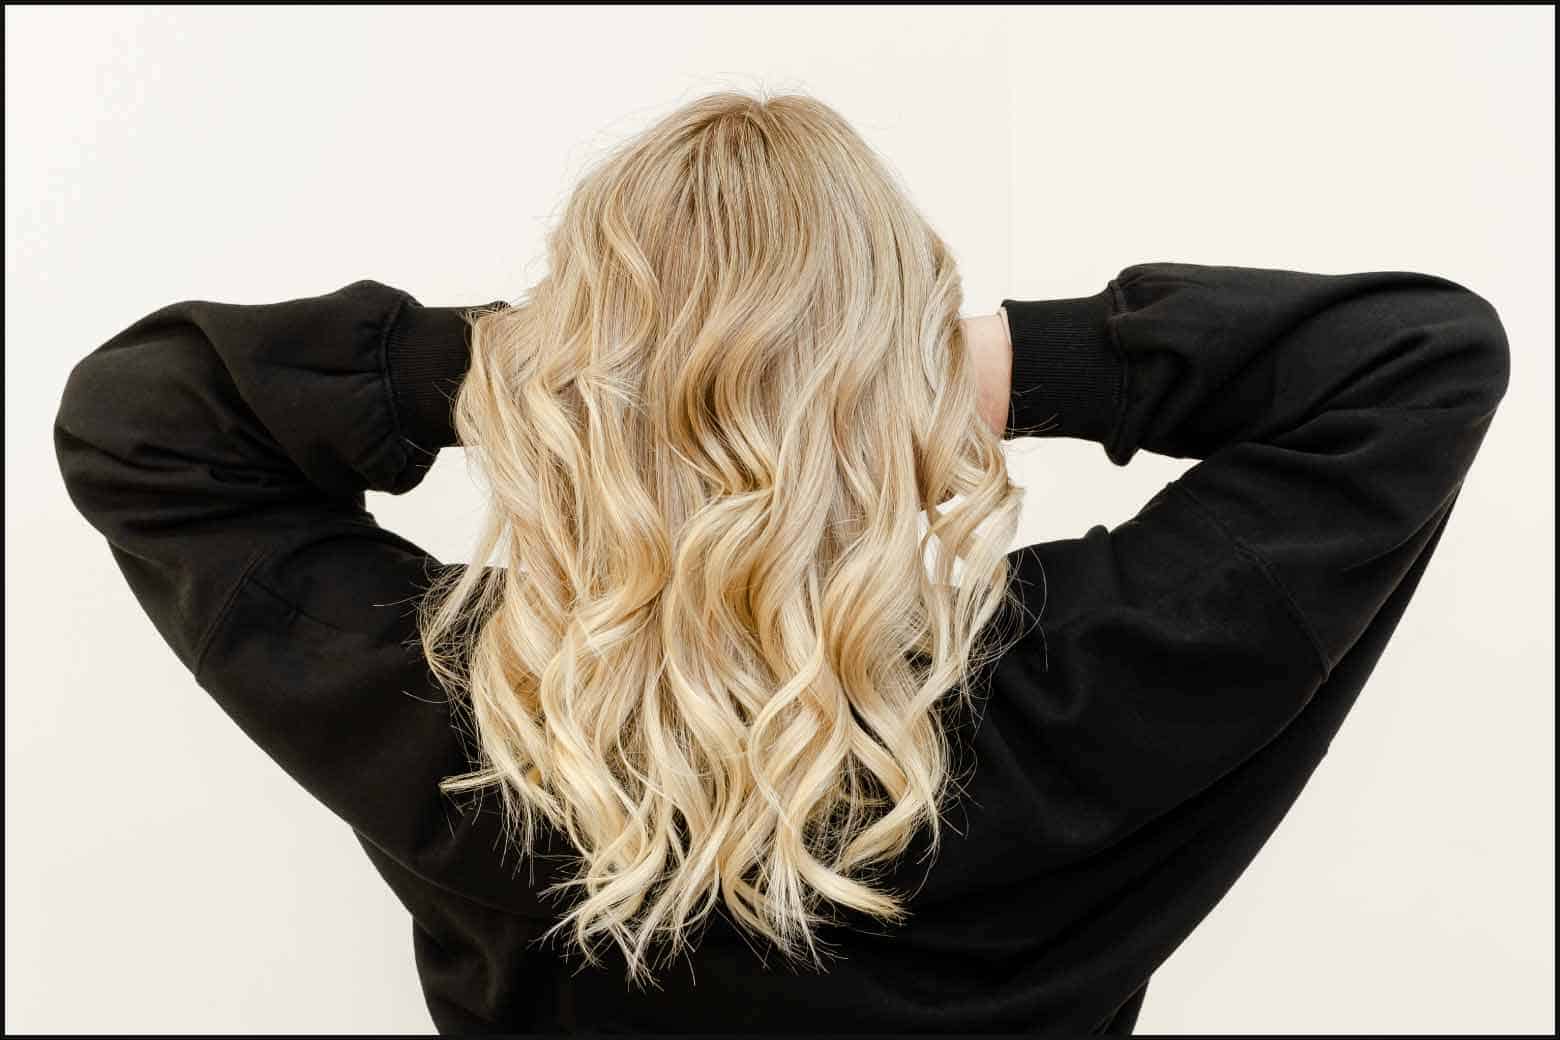 person from the back with wavy blonde hair and wearing a black sweater